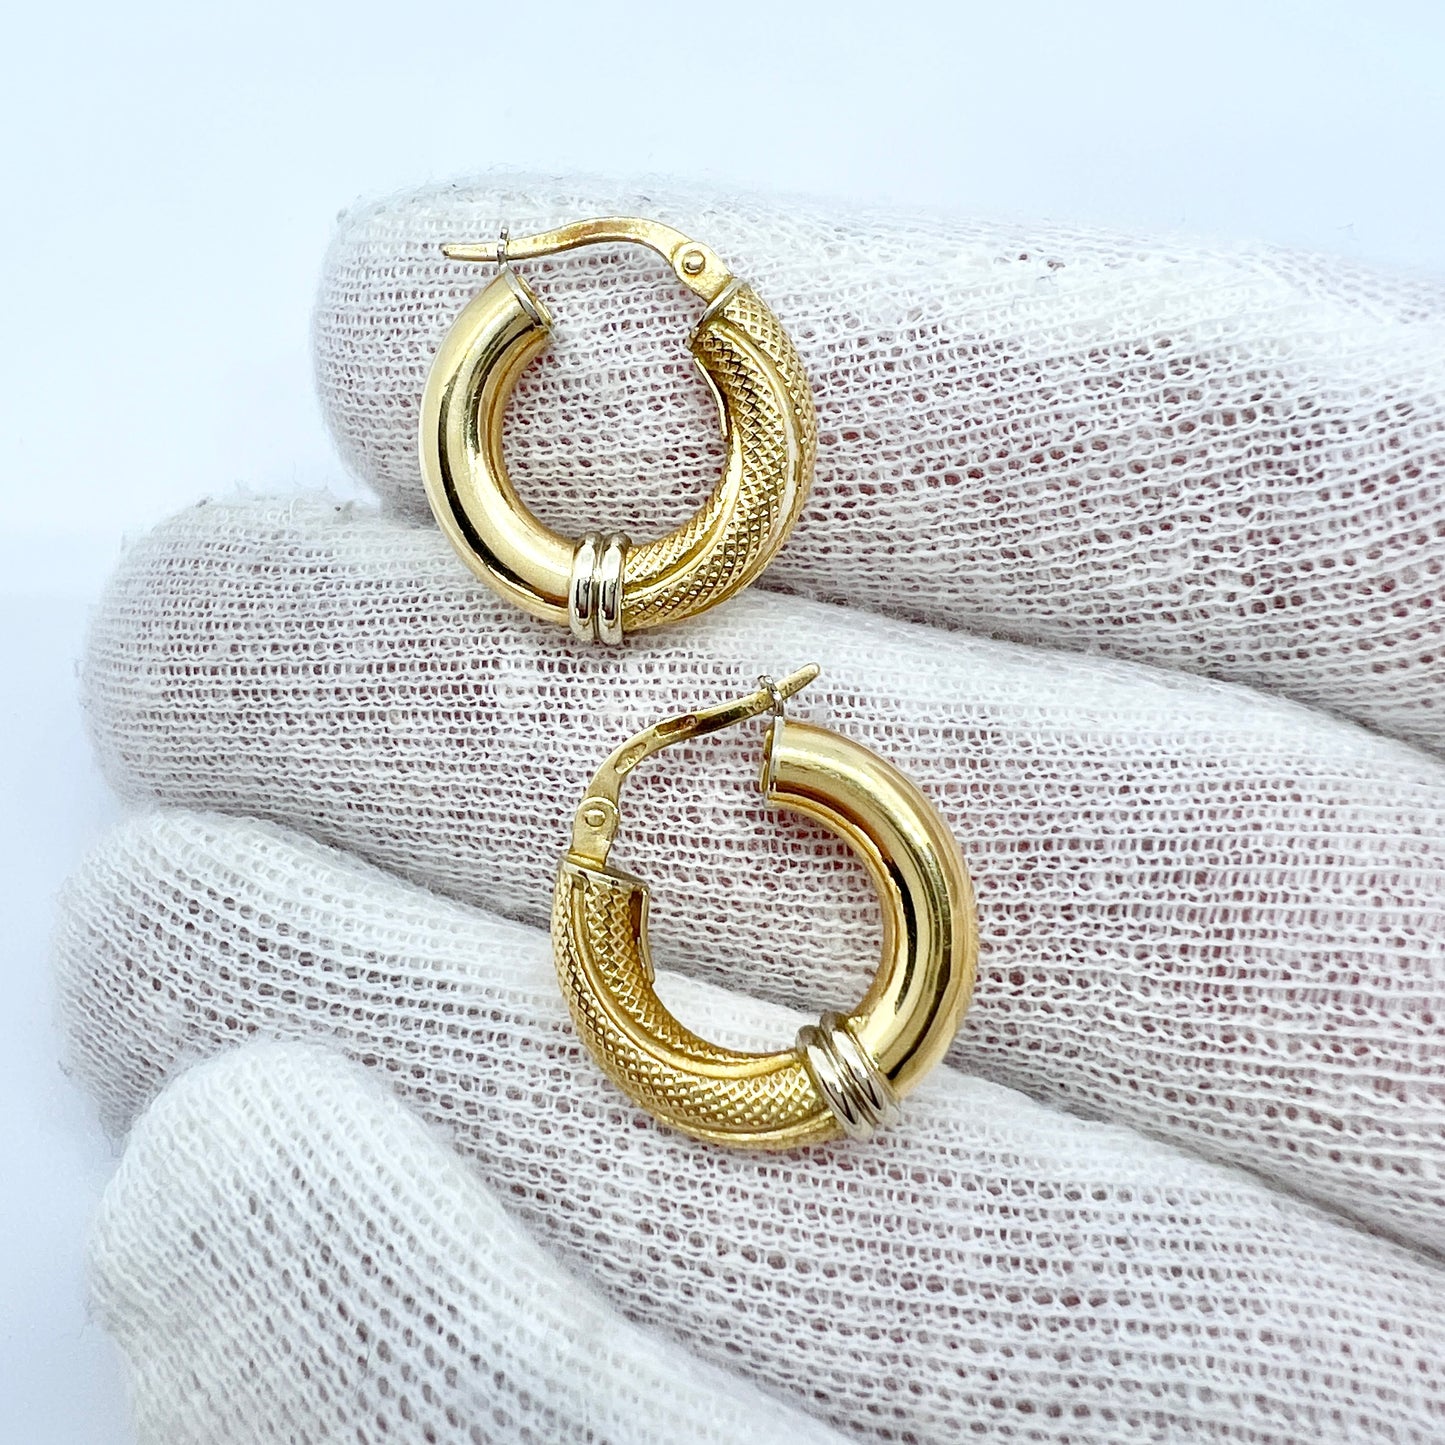 Uno A Erre, Italy. Vintage 18k Gold Earrings.